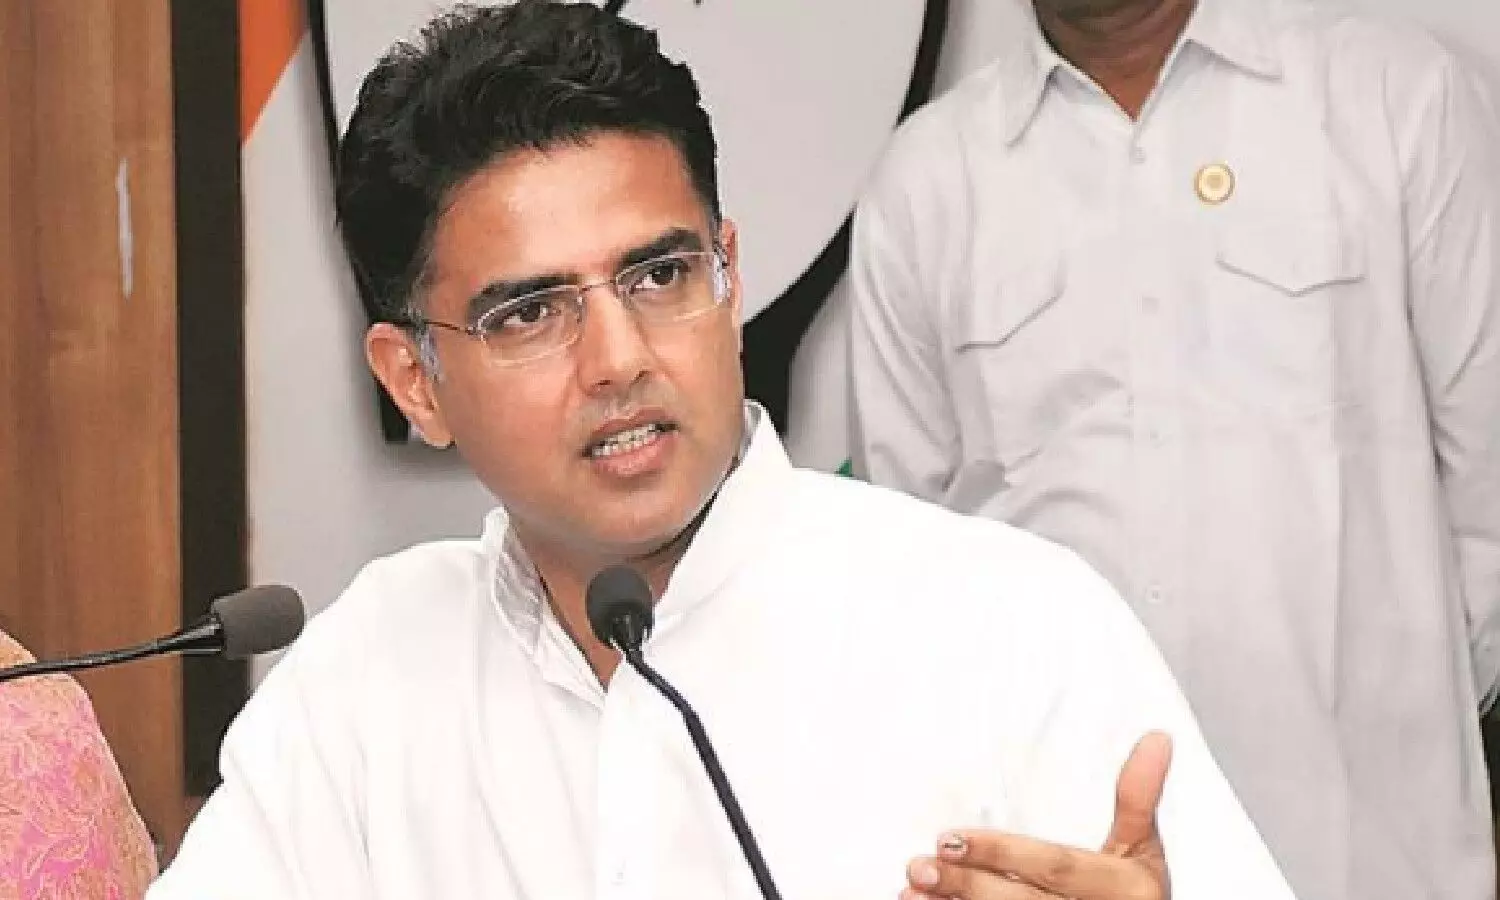 Sachin Pilot former Congress President Rahul Gandhi, is angry about the promises made to him not being fulfilled